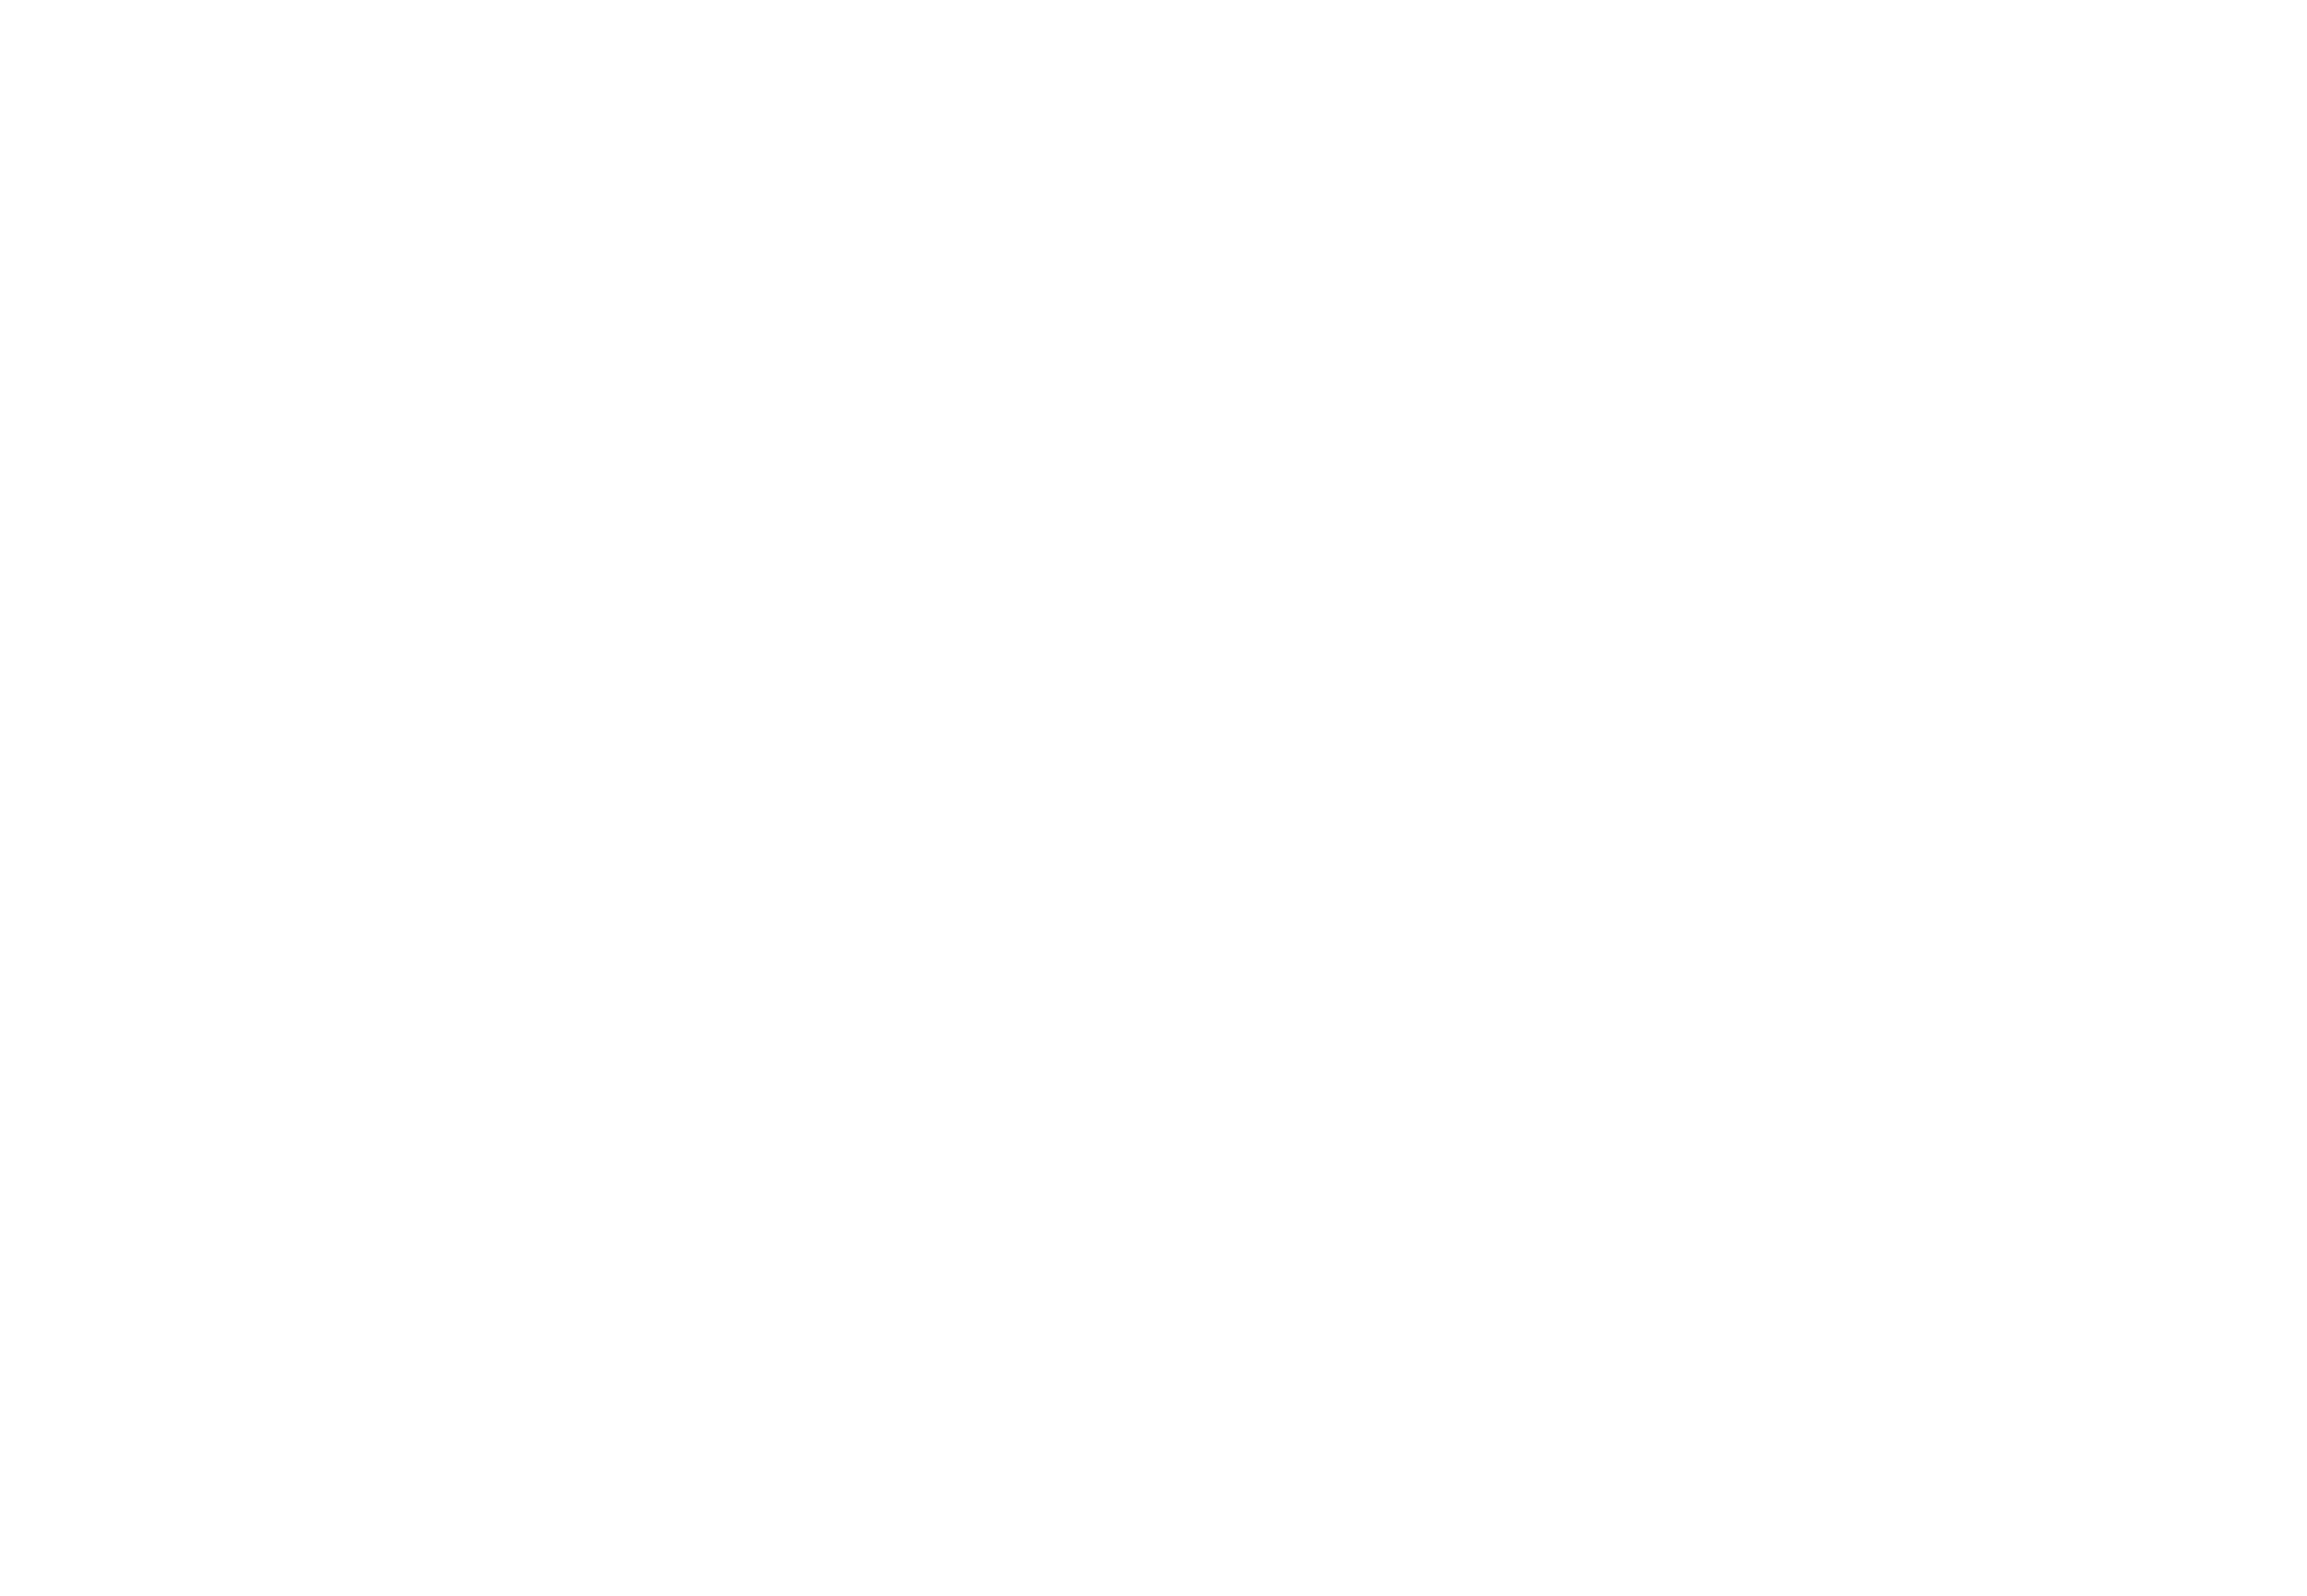 Greater-Tennessee-20